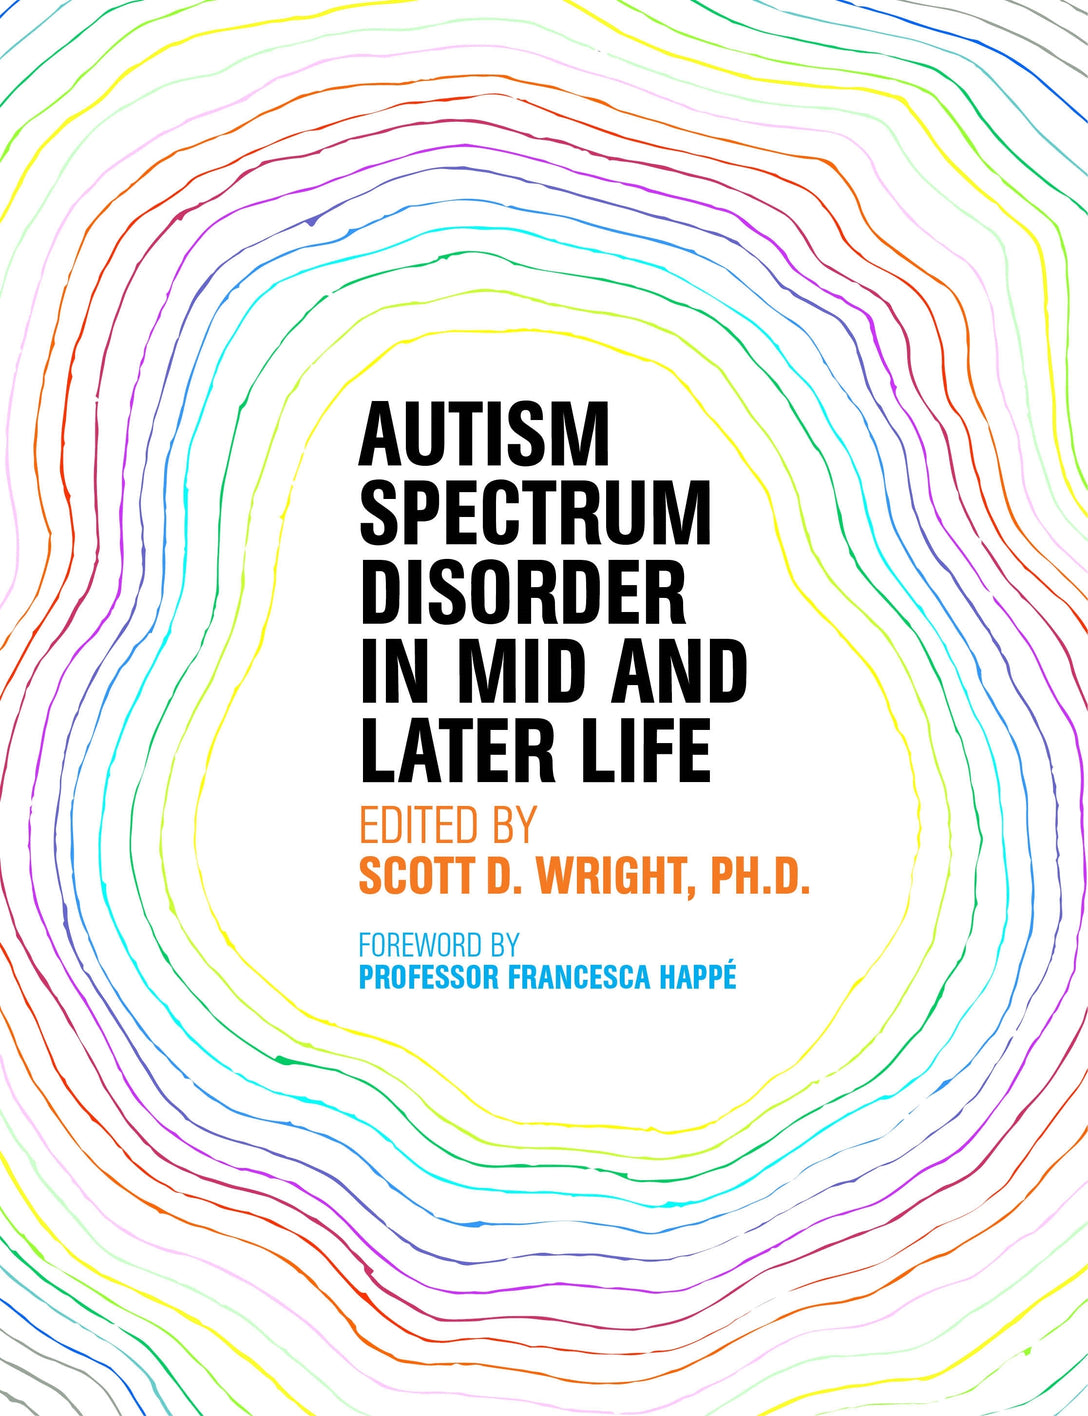 Autism Spectrum Disorder in Mid and Later Life by No Author Listed, Scott D. Wright, Francesca Happé